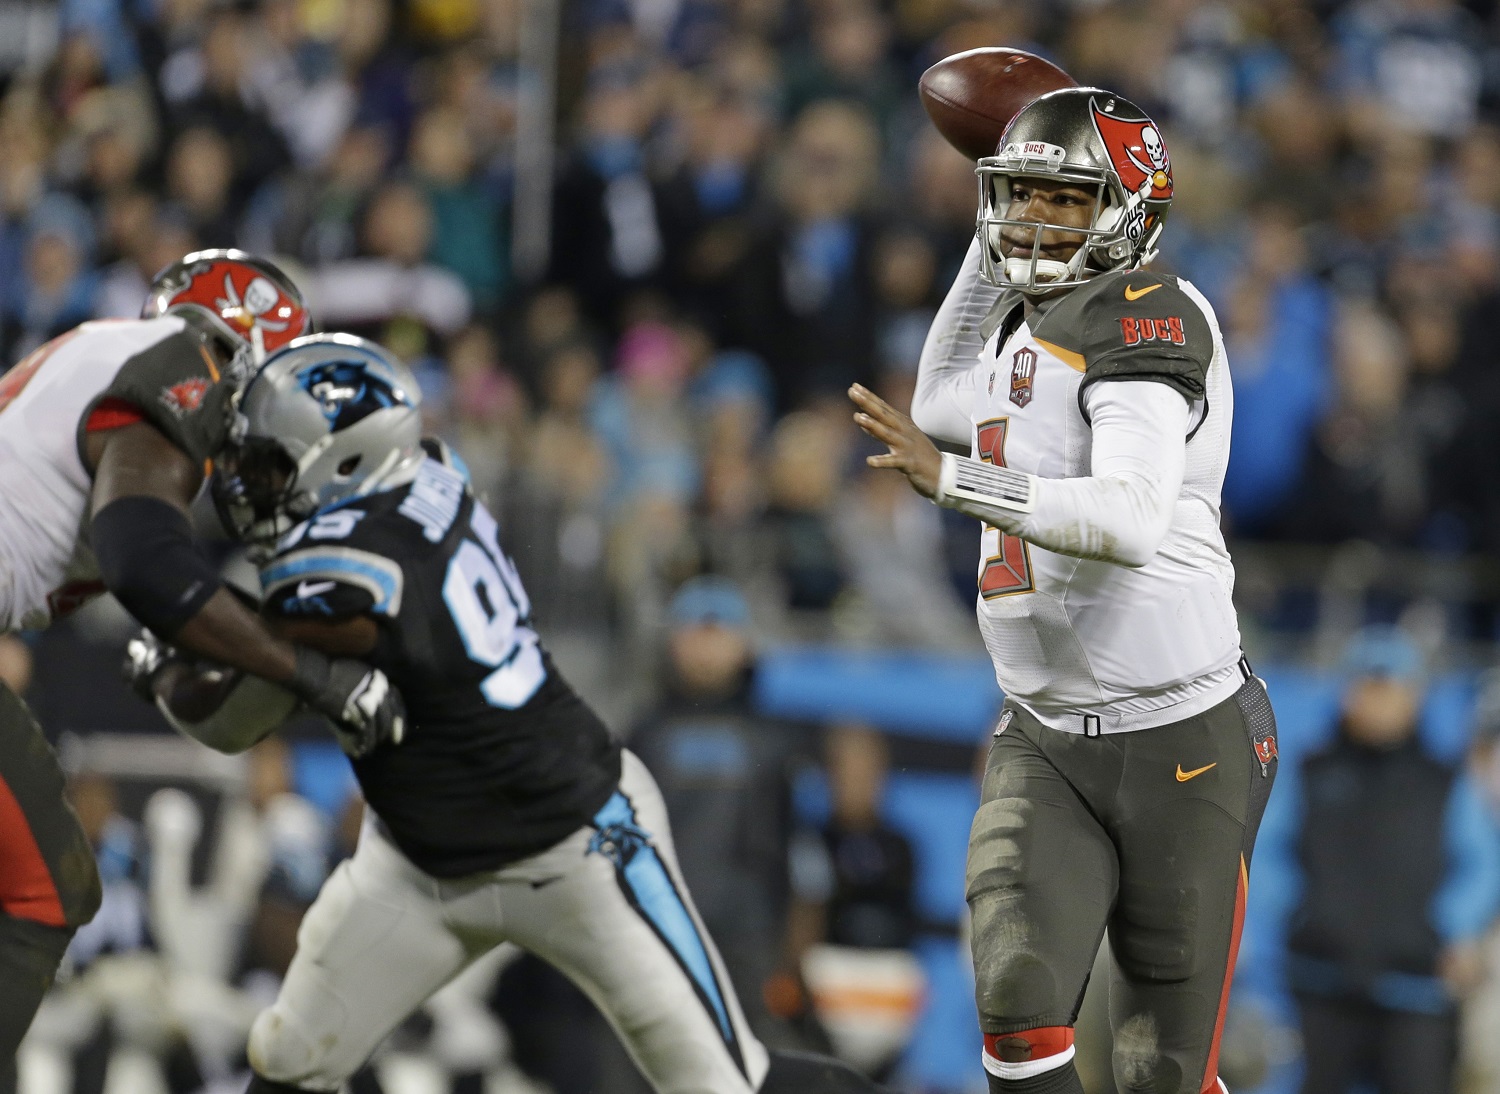 Tampa Bay Buccaneers quarterback Jameis Winston (3) looks to pass against the Carolina Panthers in the first half of an NFL football game in Charlotte, N.C., Sunday, Jan. 3, 2016. (AP Photo/Bob Leverone)